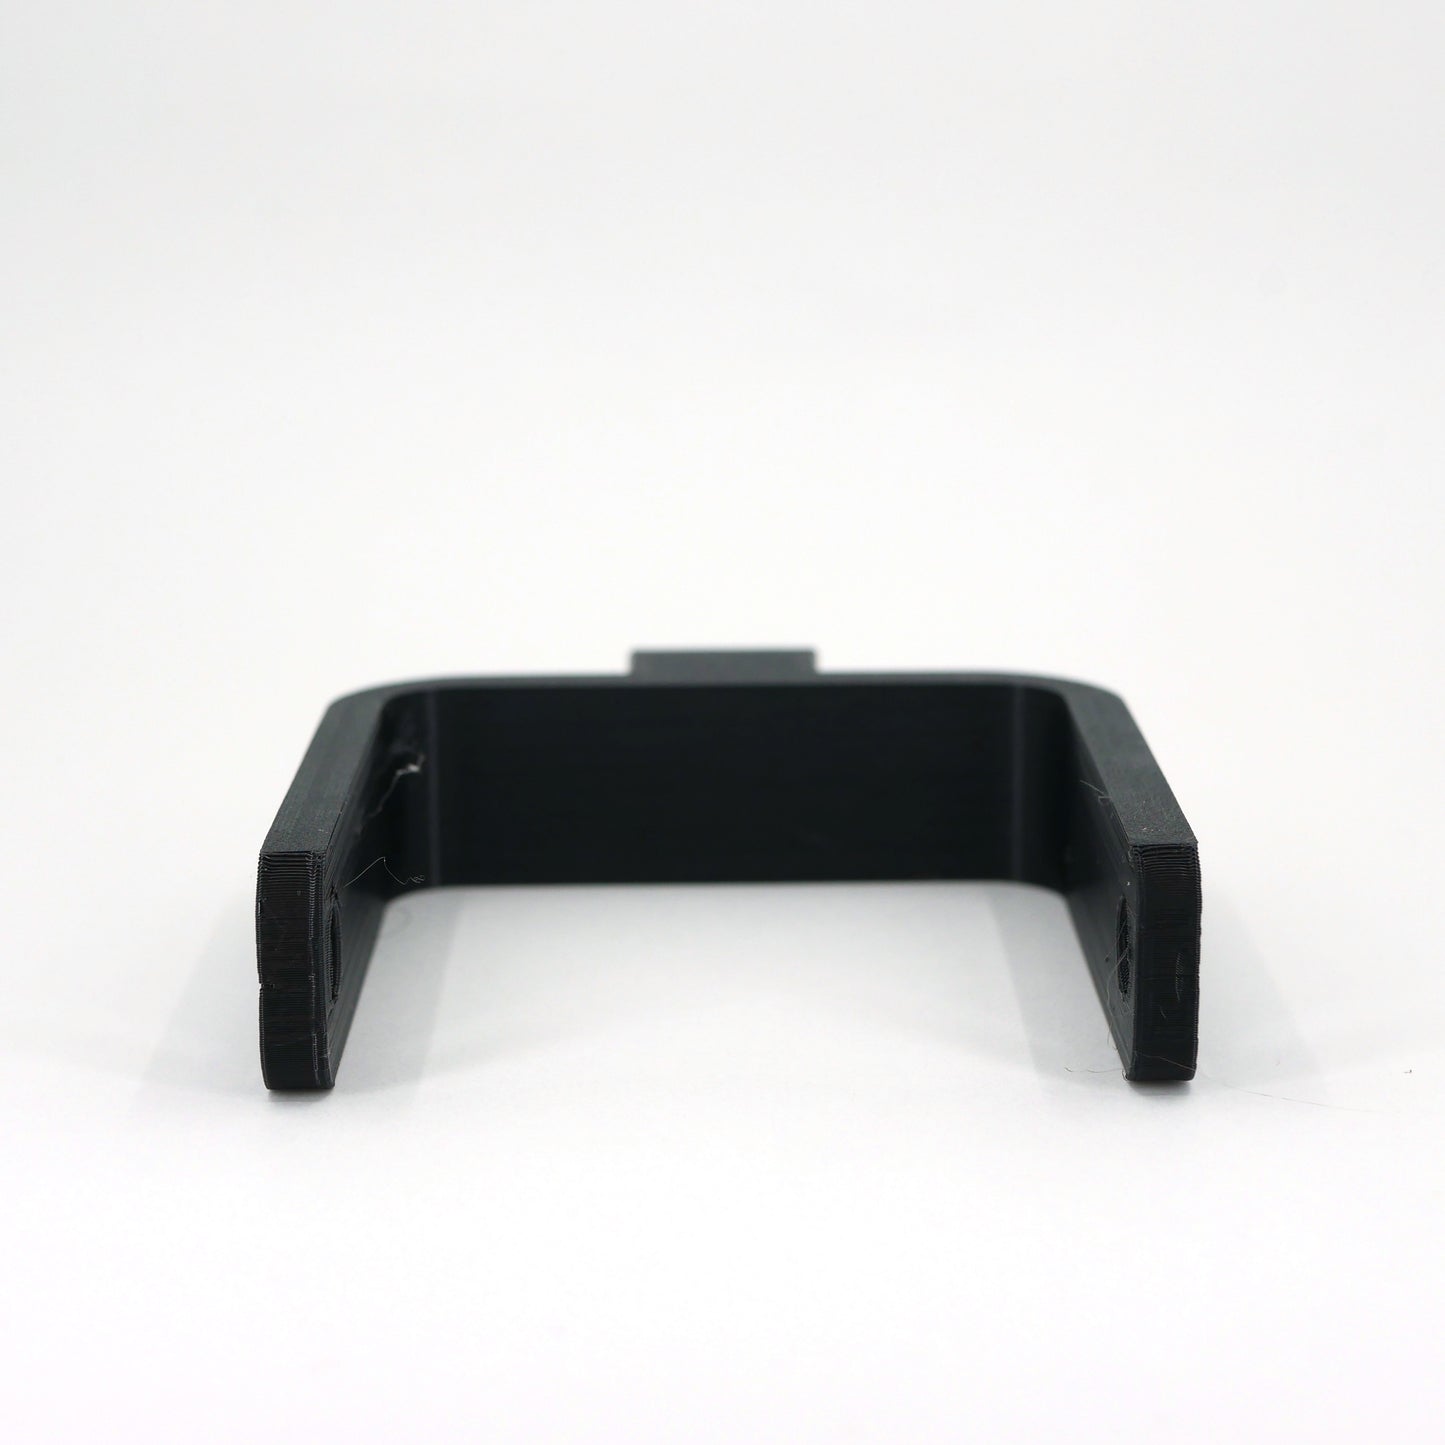 The front of a black microphone mount for the Elgato Wave microphone.